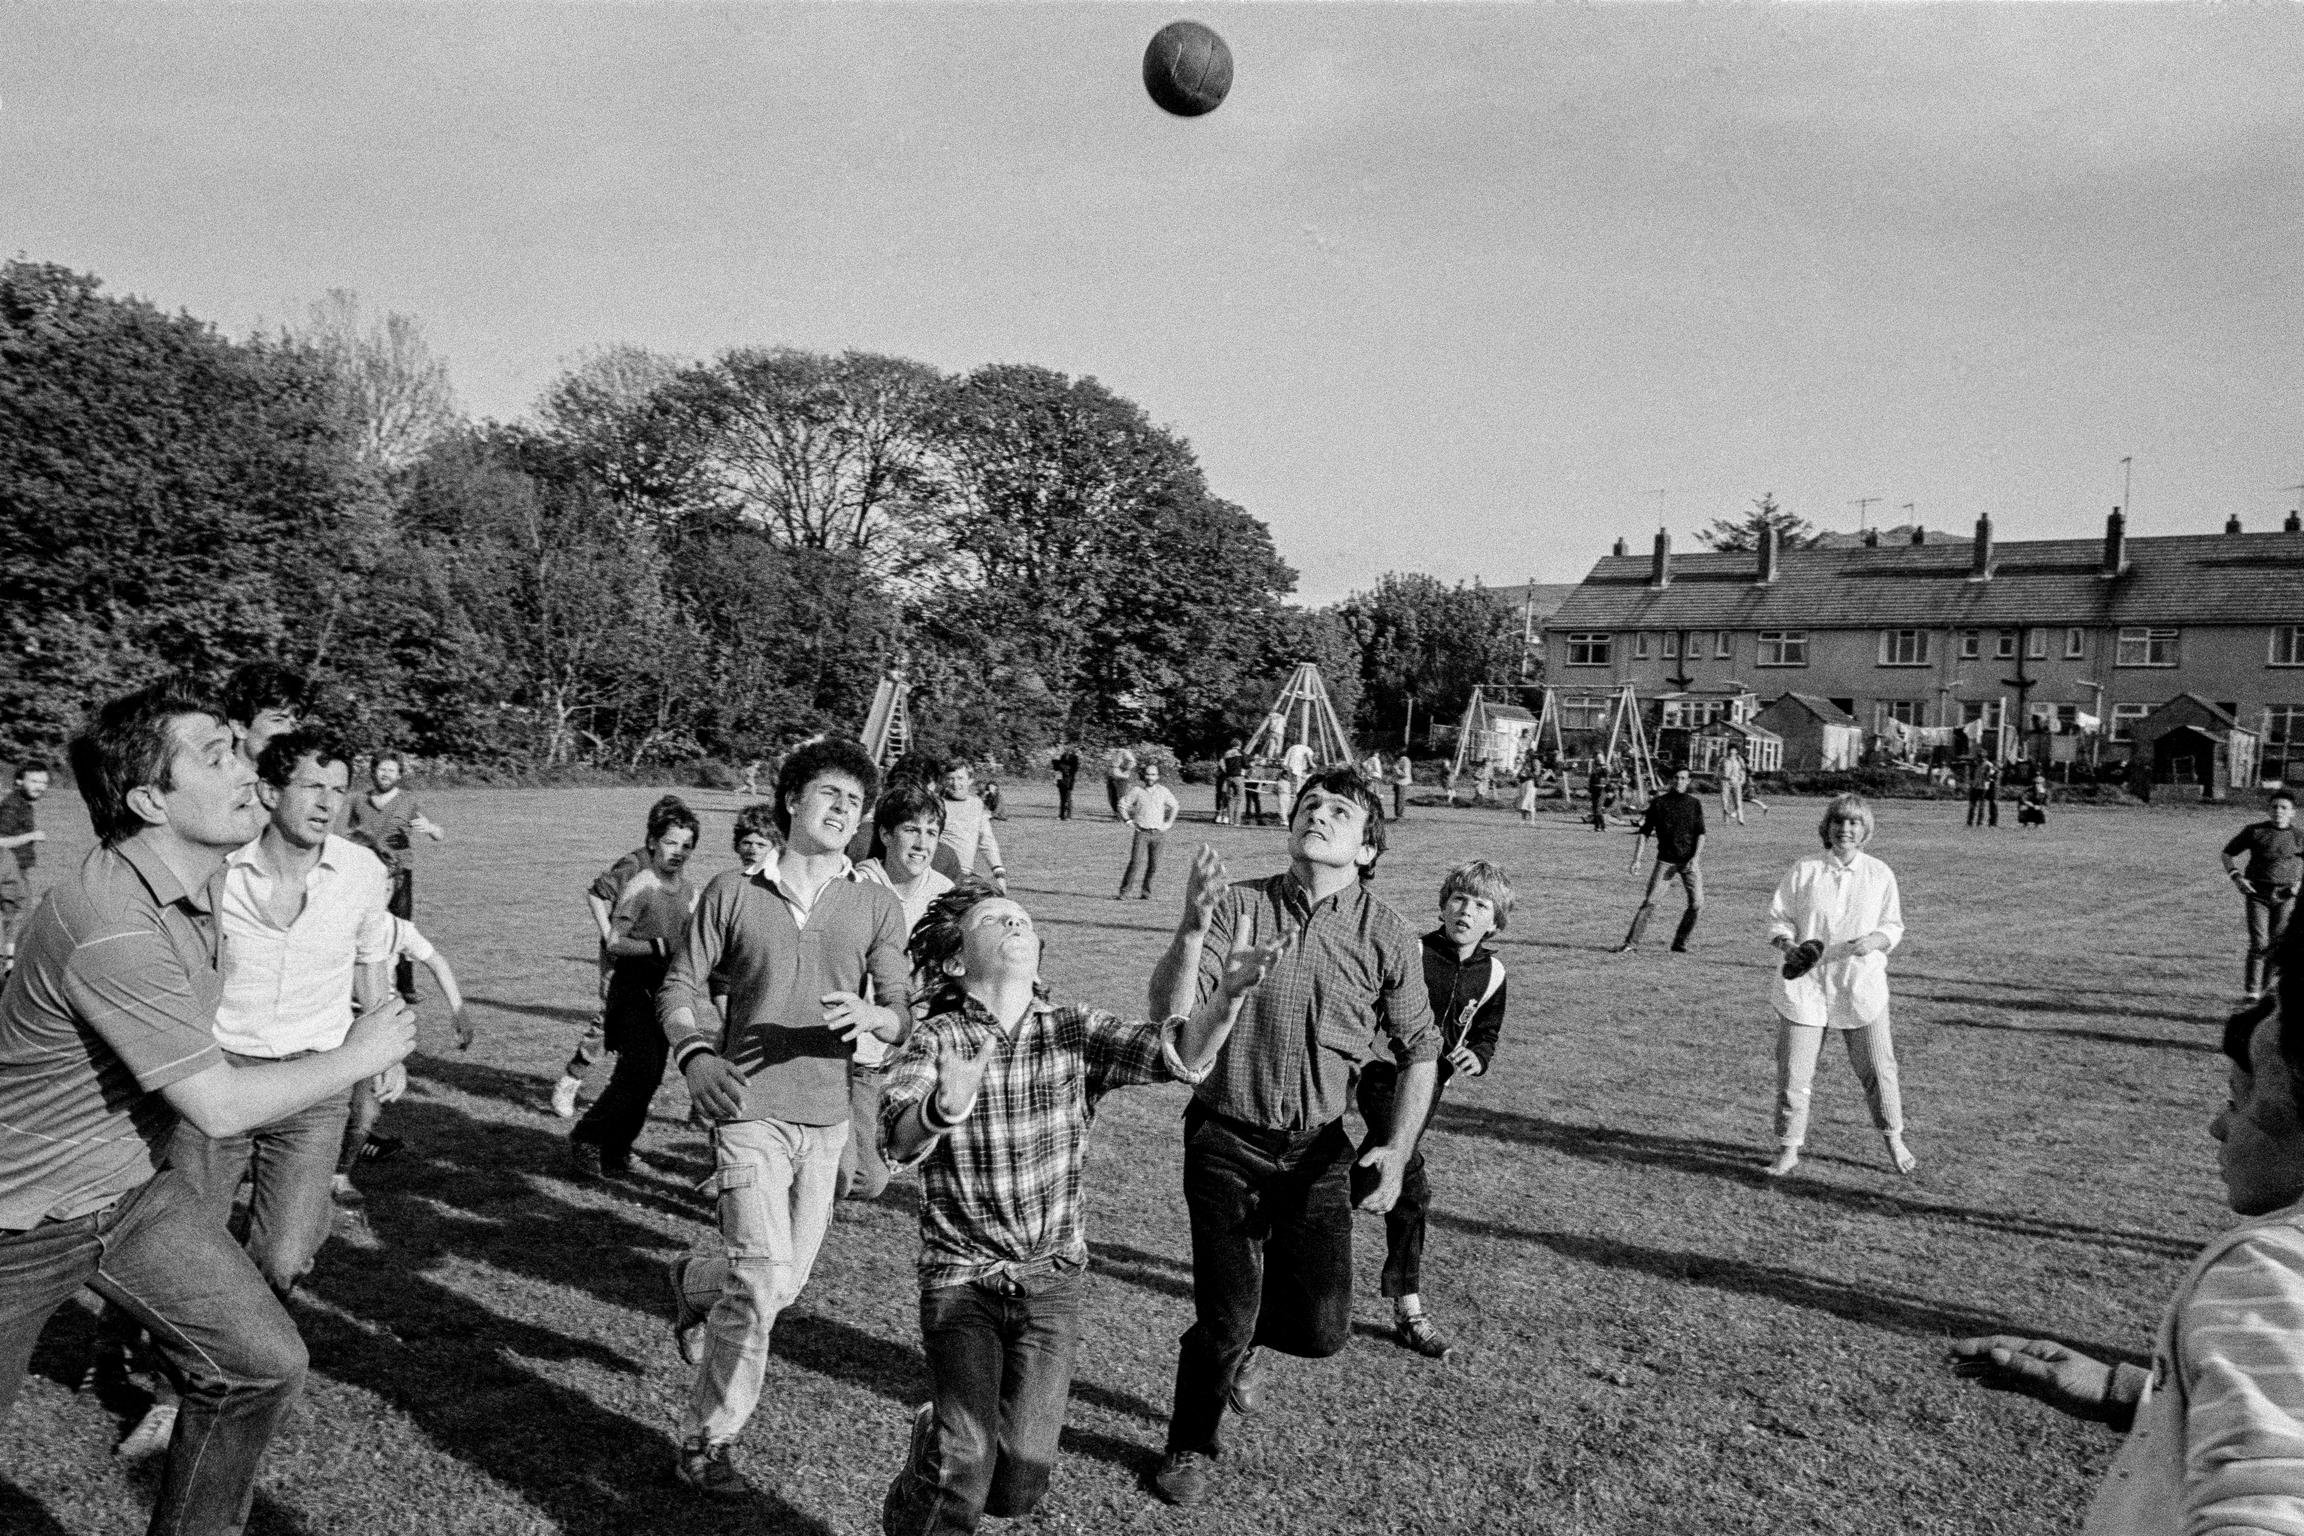 Playing Cnapan (the beginning of Rugby football). Newport, Wales